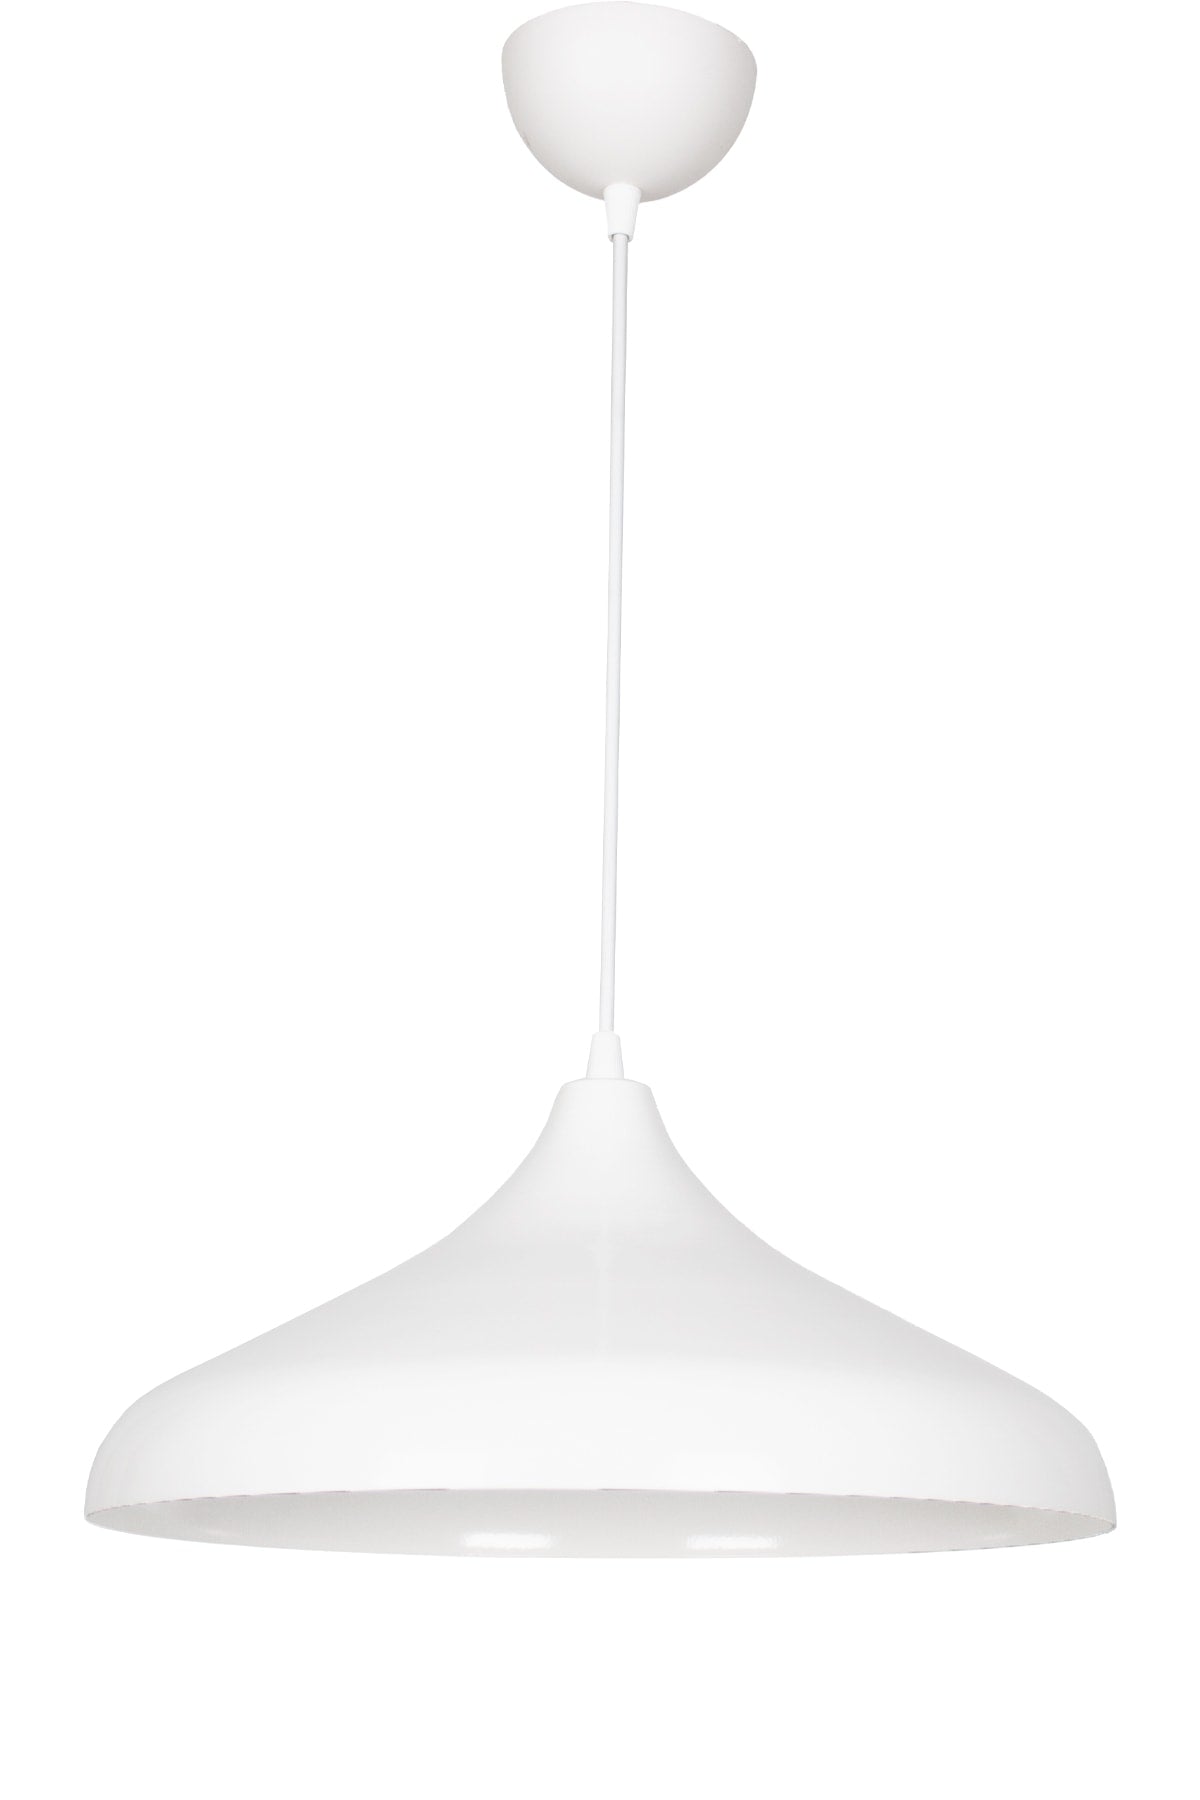 Nil Special Design Bright White Metal Cafe - Kitchen Single Chandelier